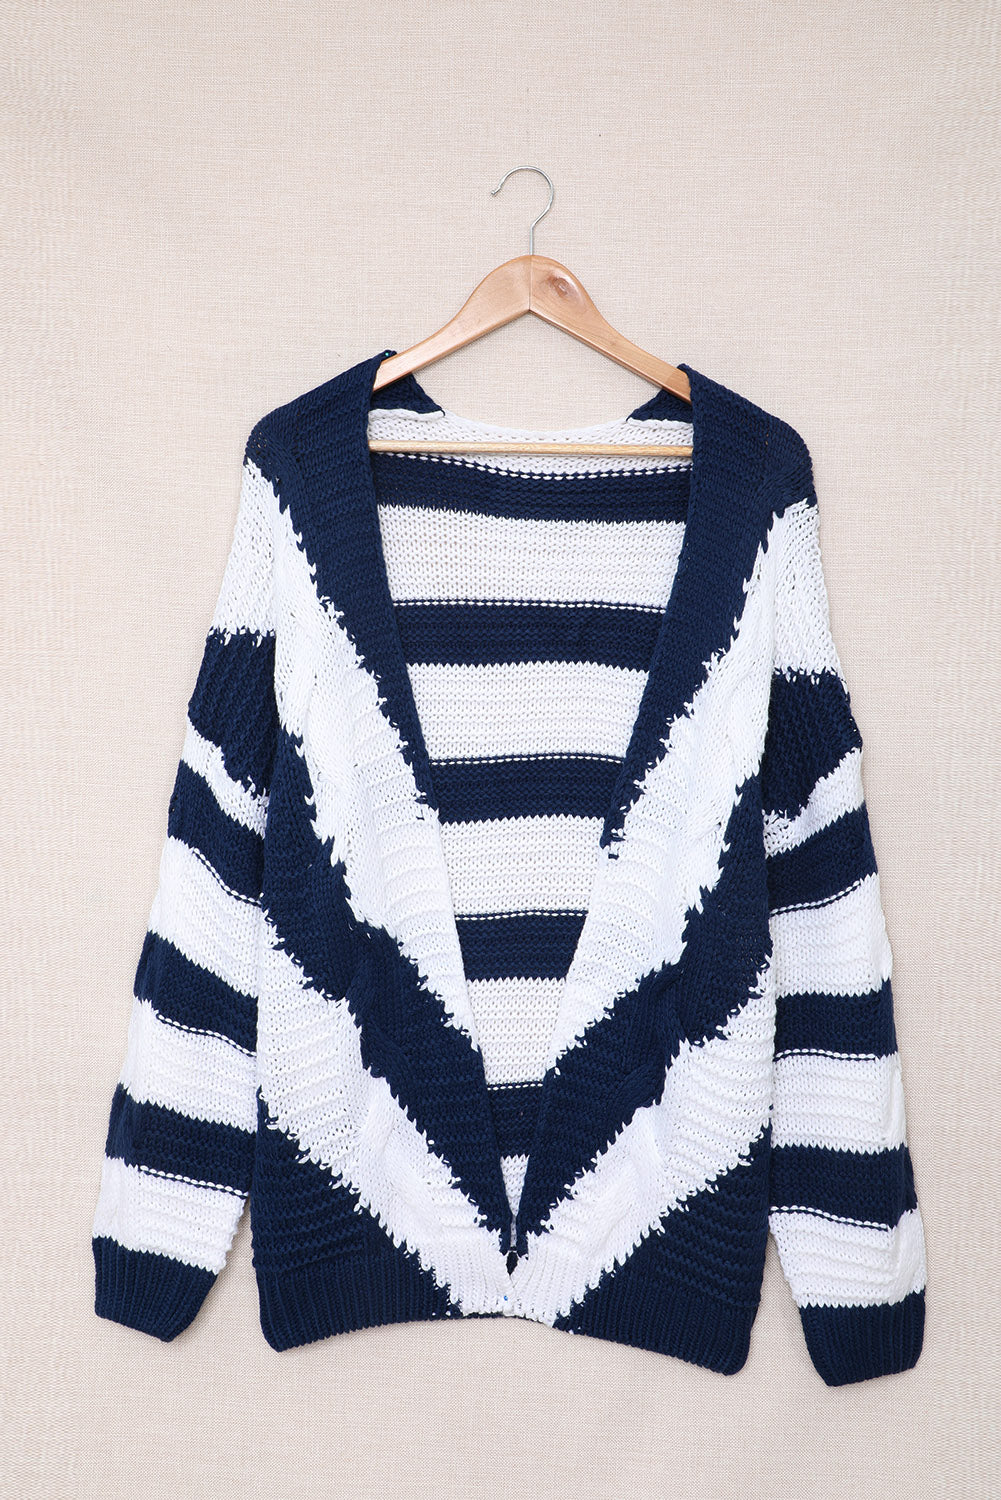 Two-Tone Striped Open Front Ribbed Trim Cardigan